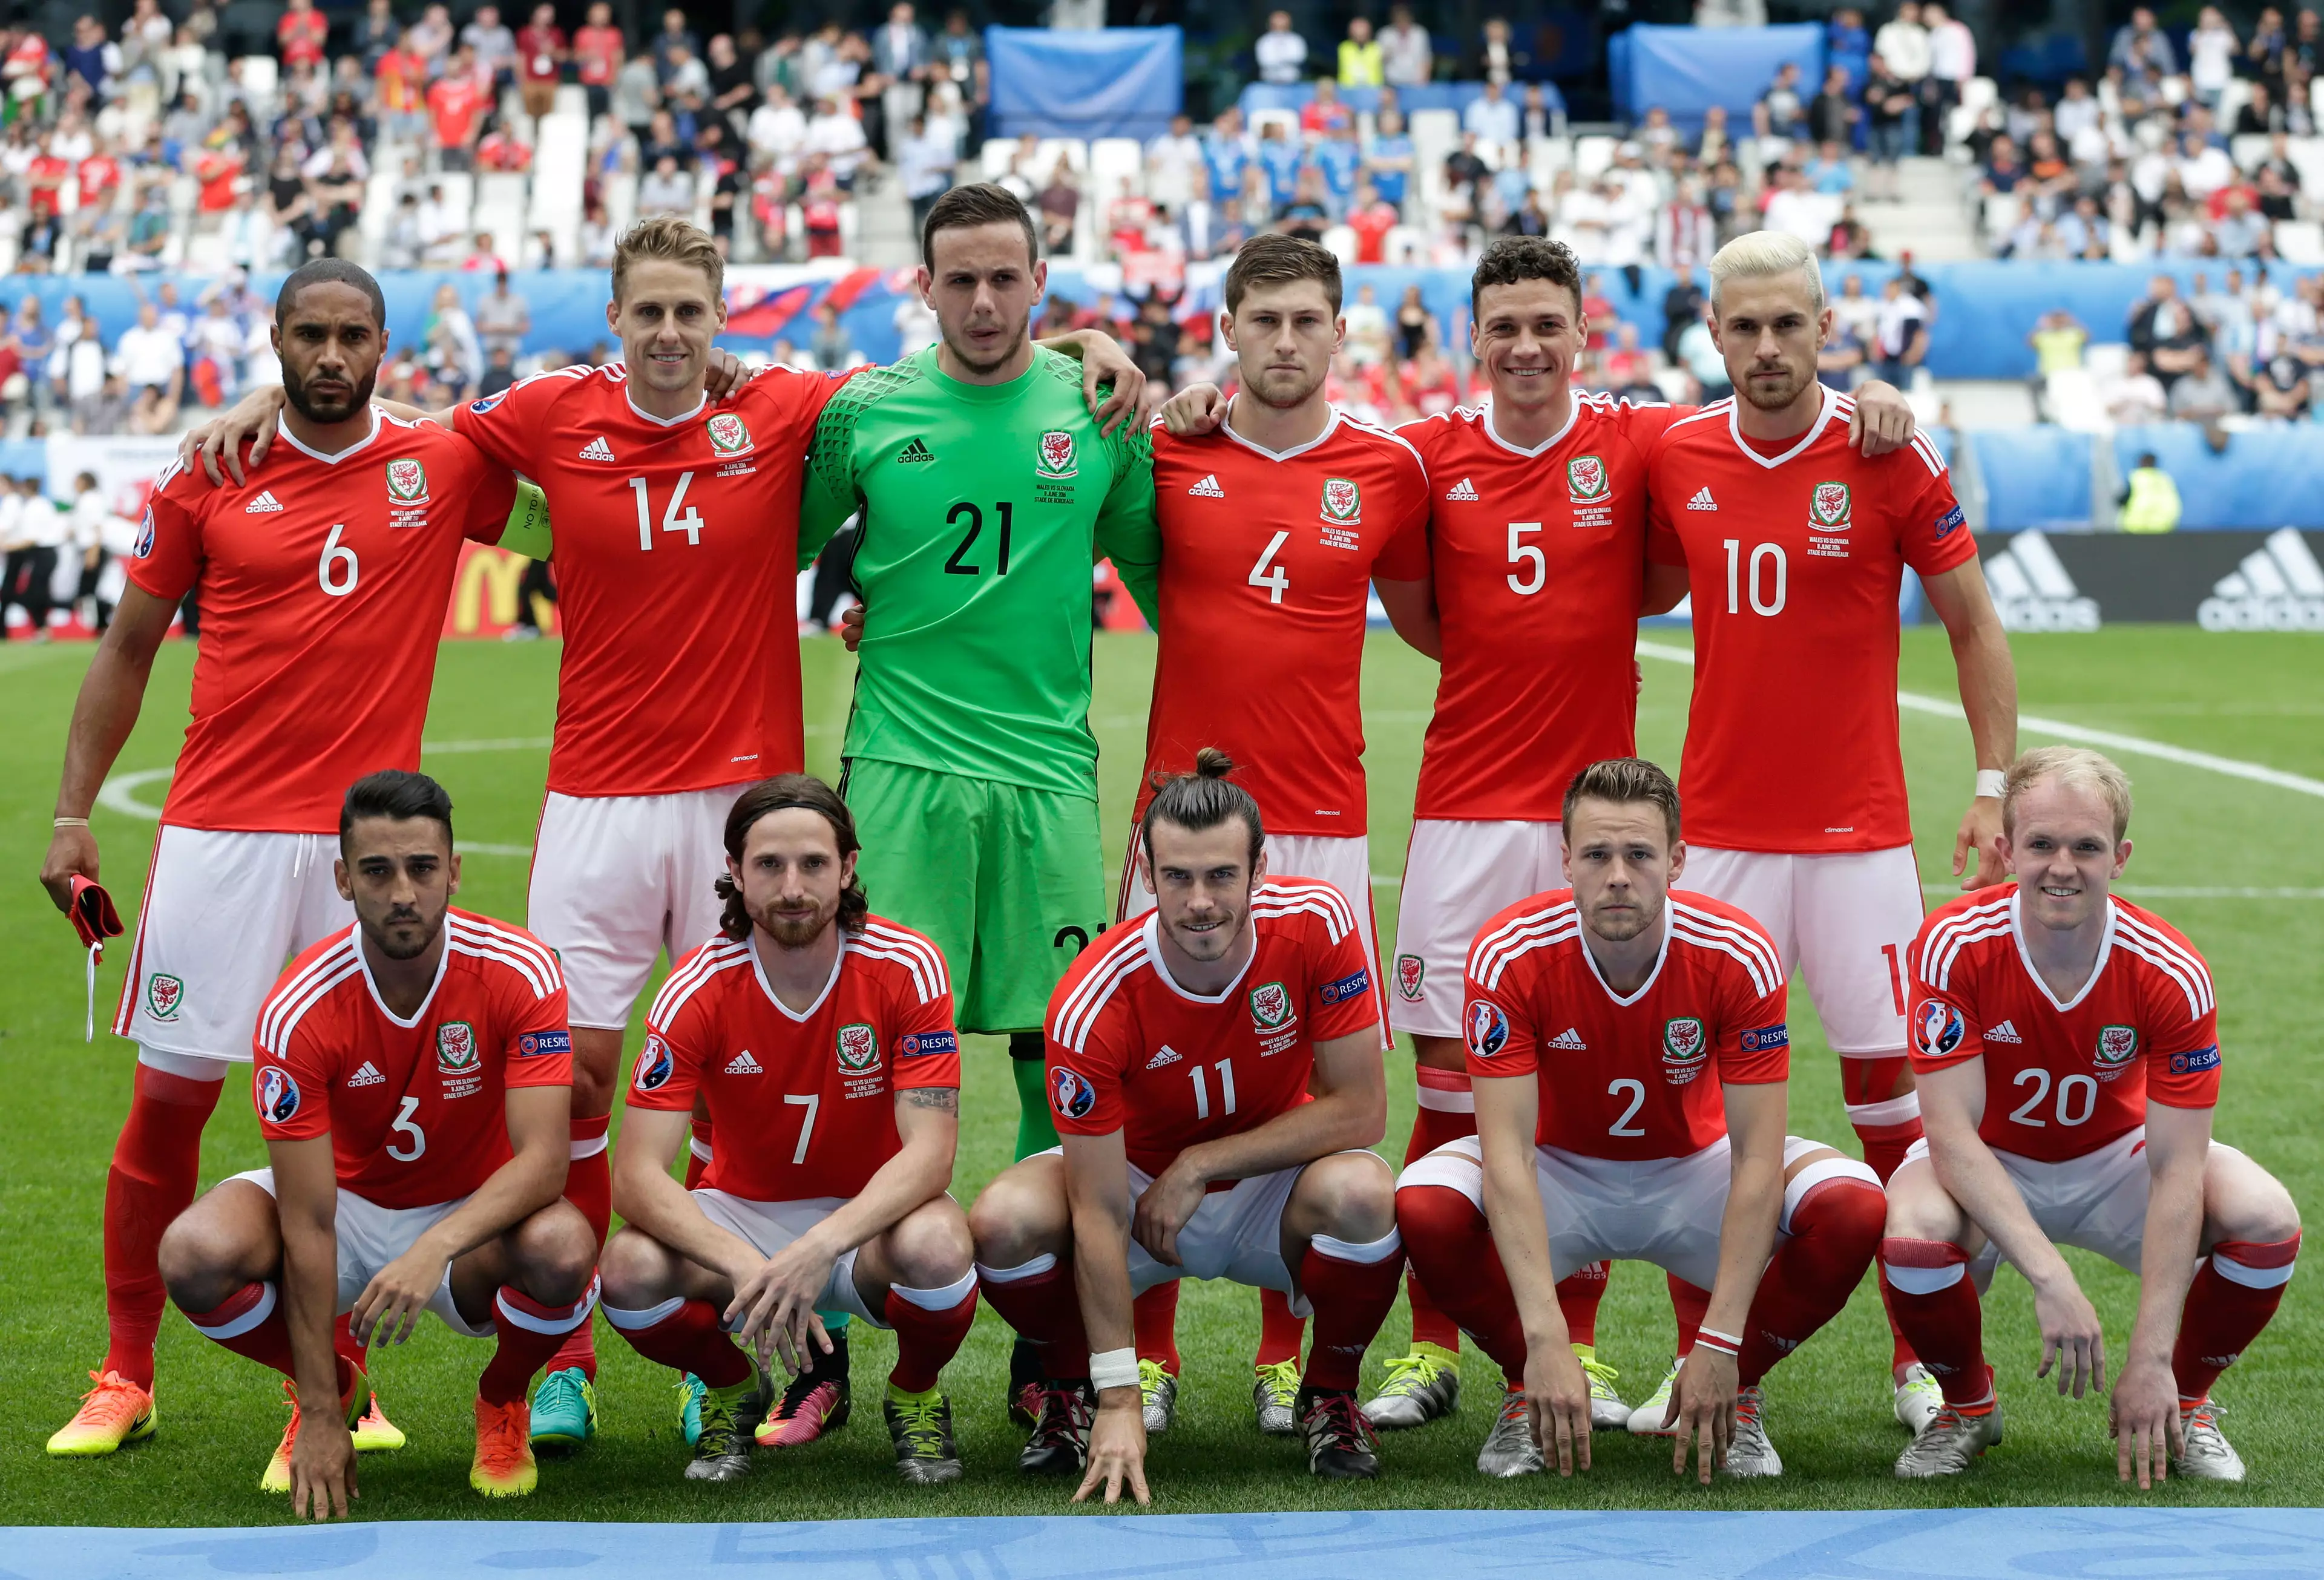 Wales International Rented Out His Spare Room To One Of England's Star Players